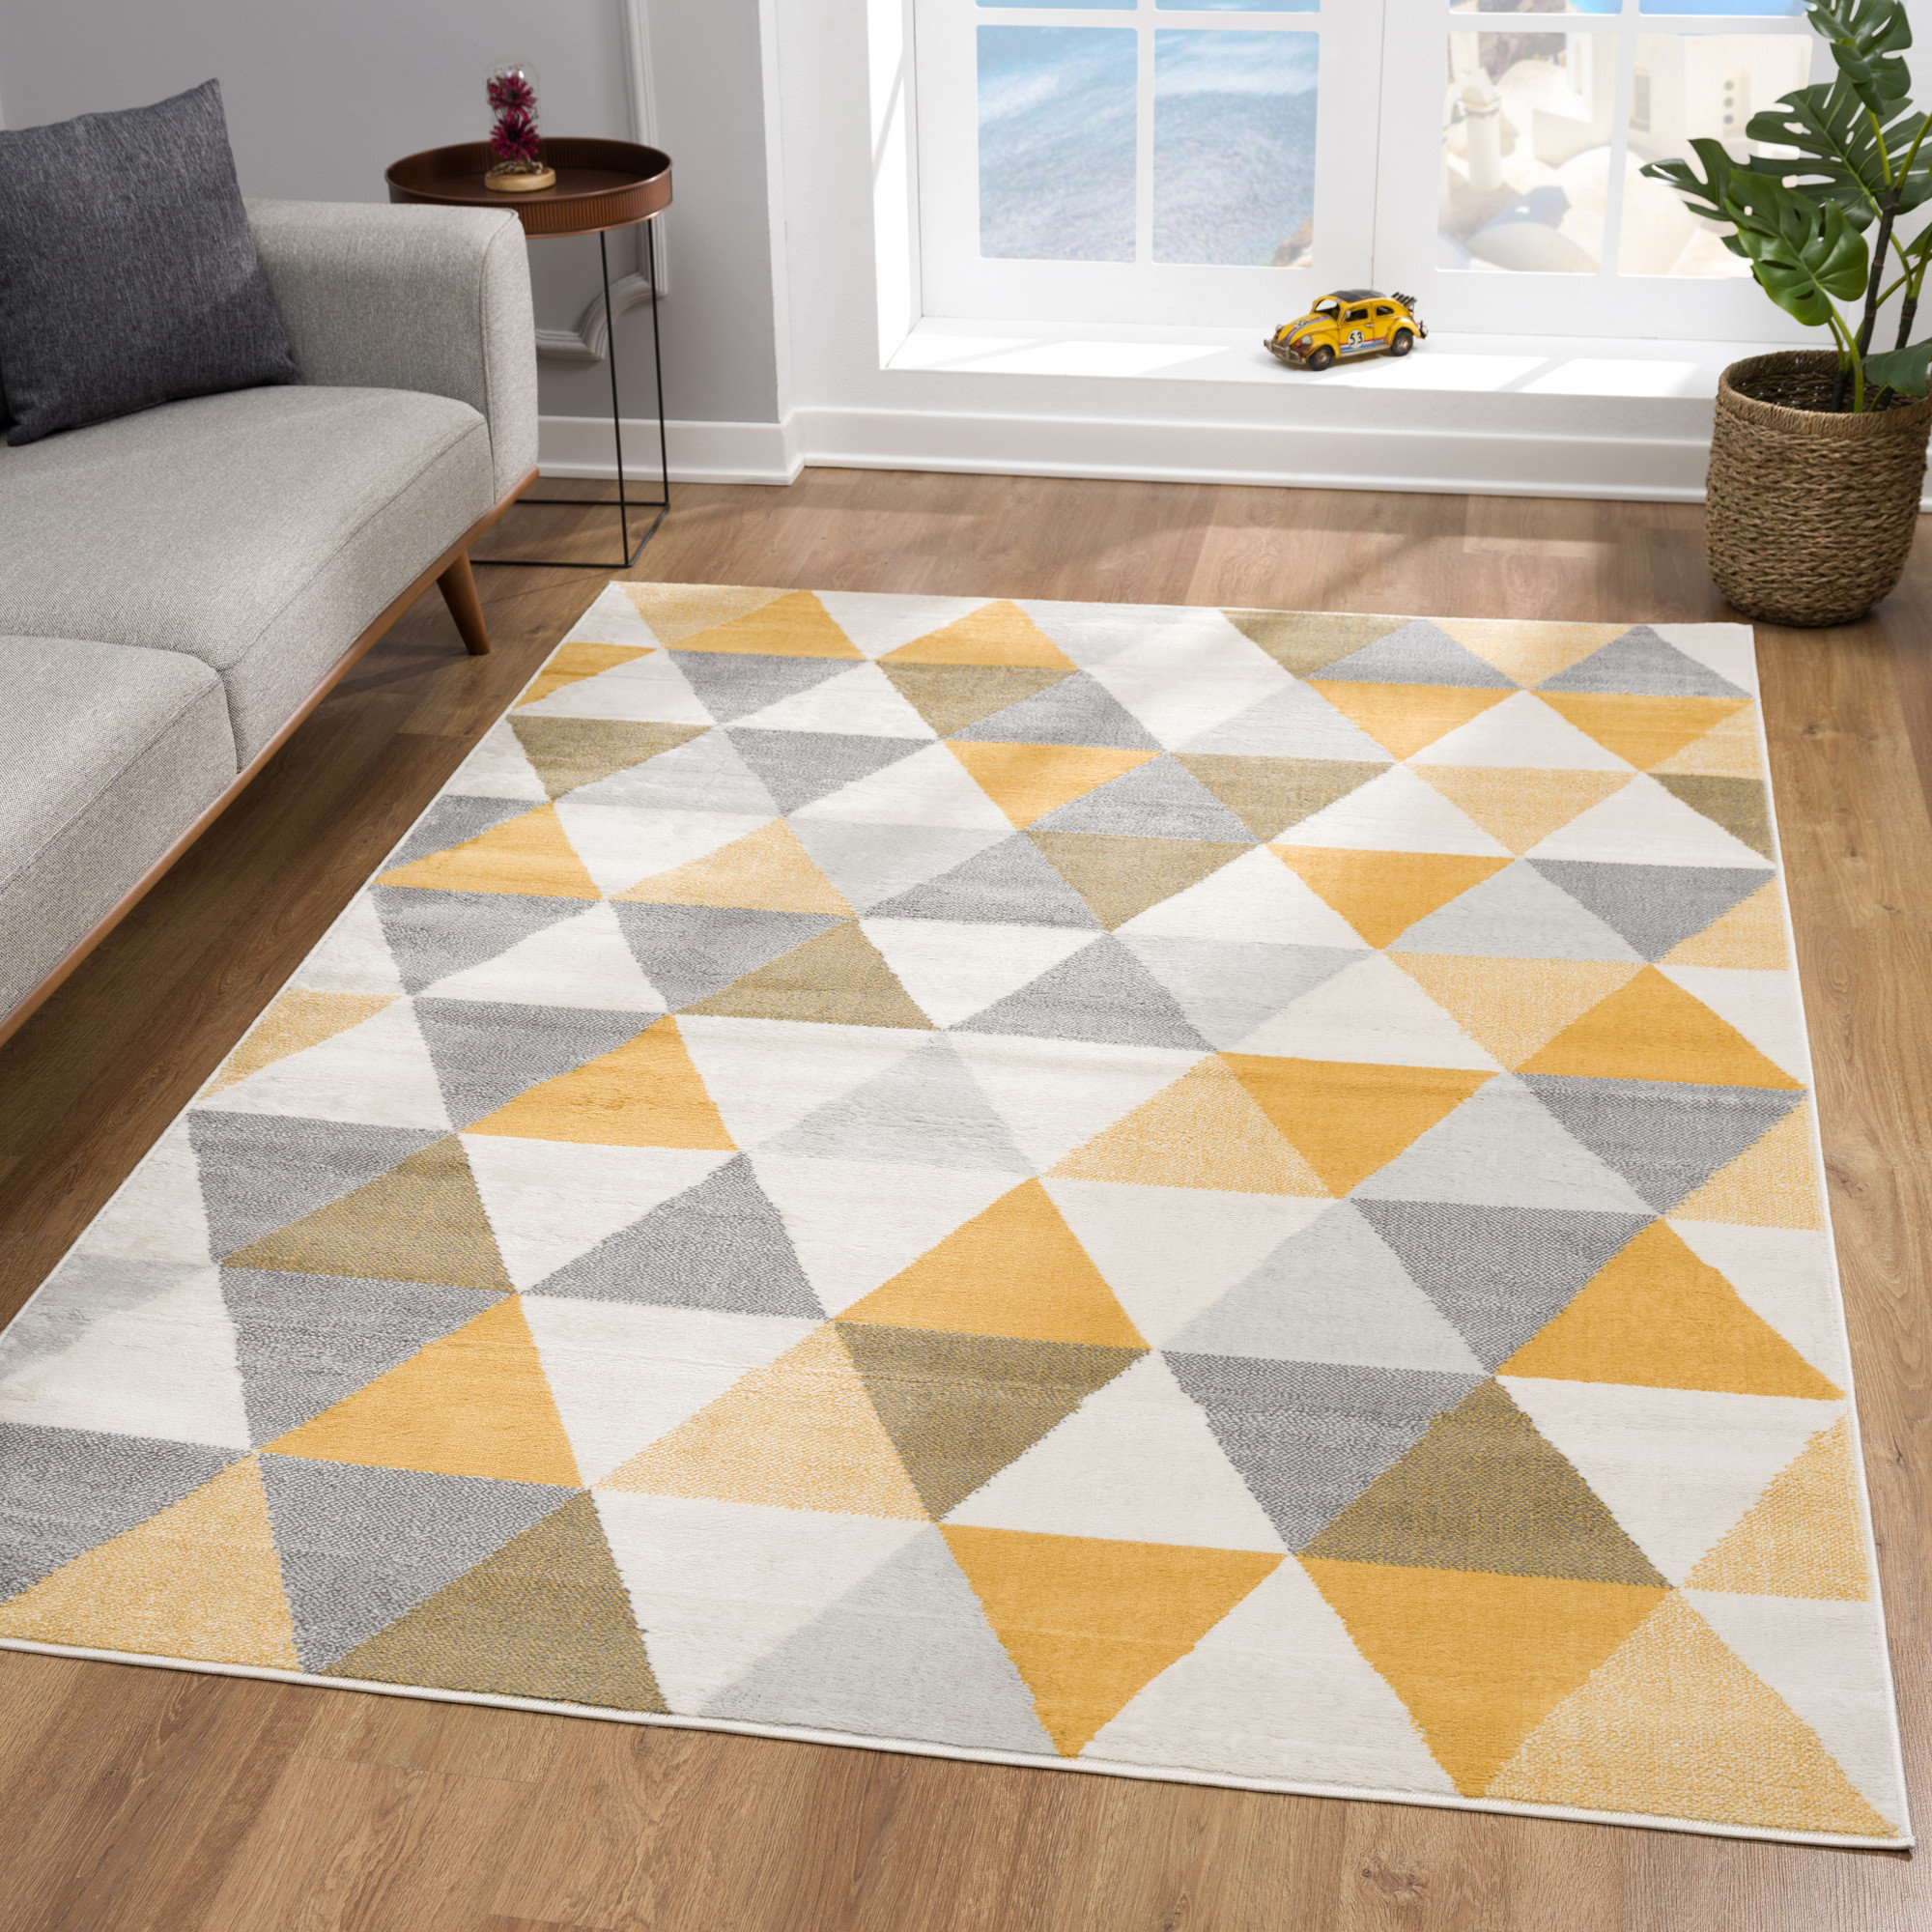 Corrigan Studio® Kymiere Collection Modern Abstract Round Rug (5X5 Feet) -  5'3 X 5'3, Yellow